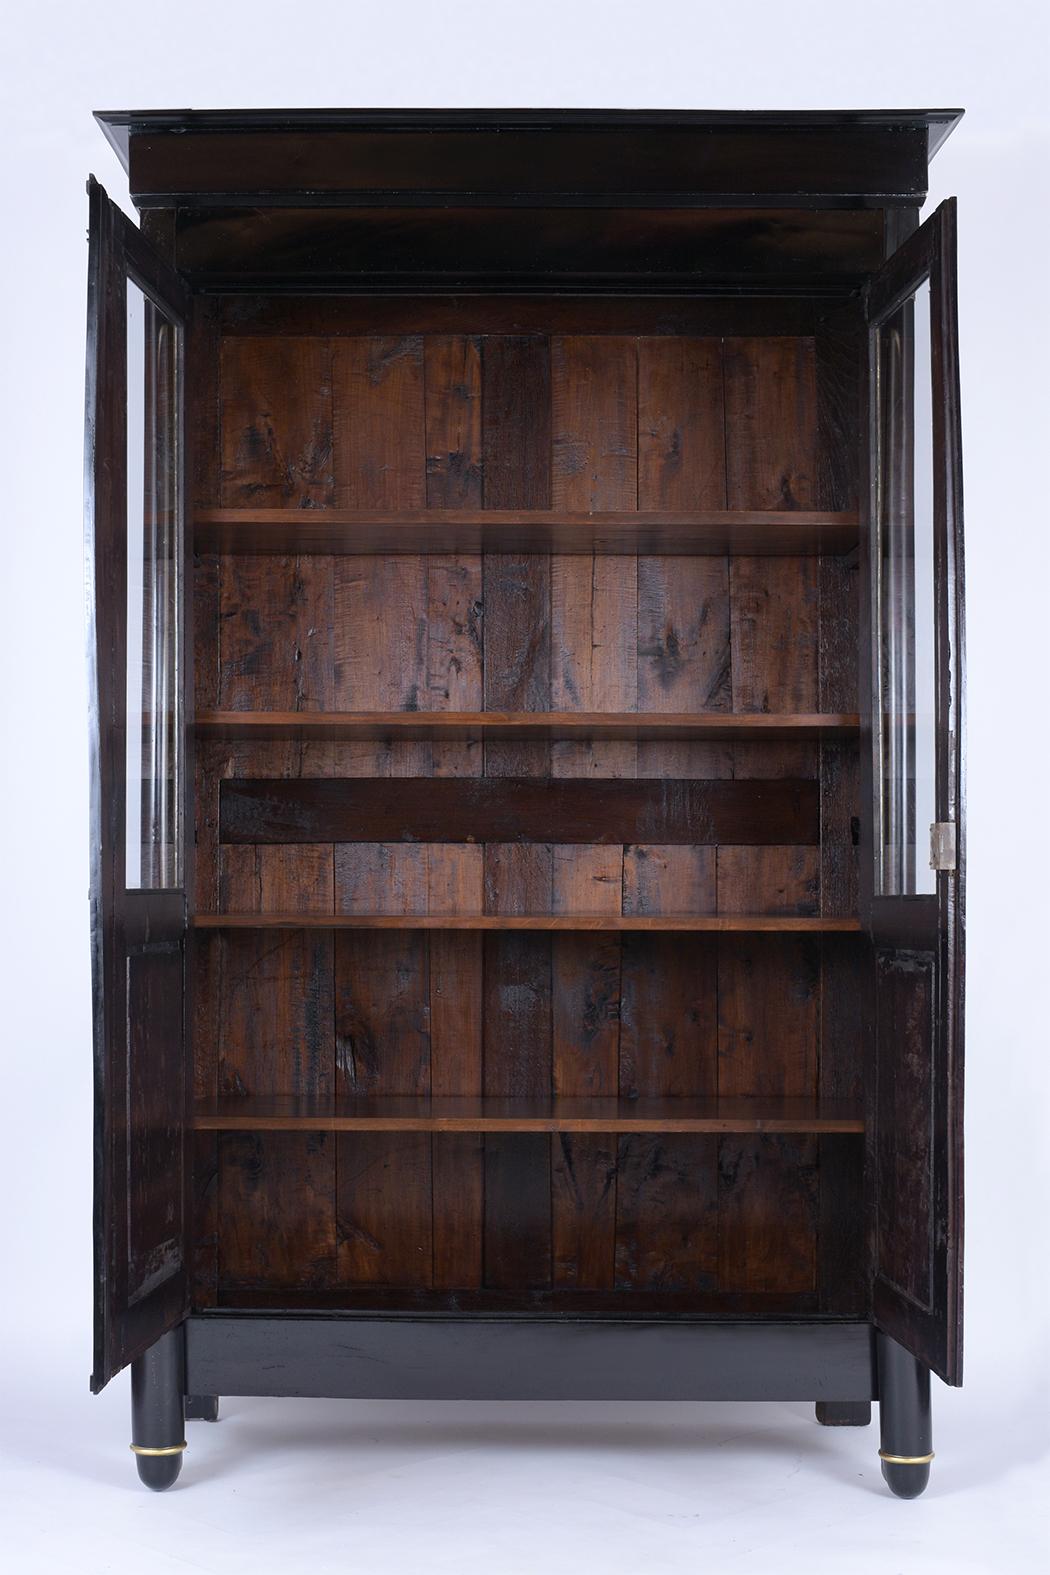 This French late 18th century double door bookcase is made out of mahogany wood newly stained in an ebonized color with gilt molding accents and polished lacquered finish. This elegant Empire style display features two doors with clear glass on the